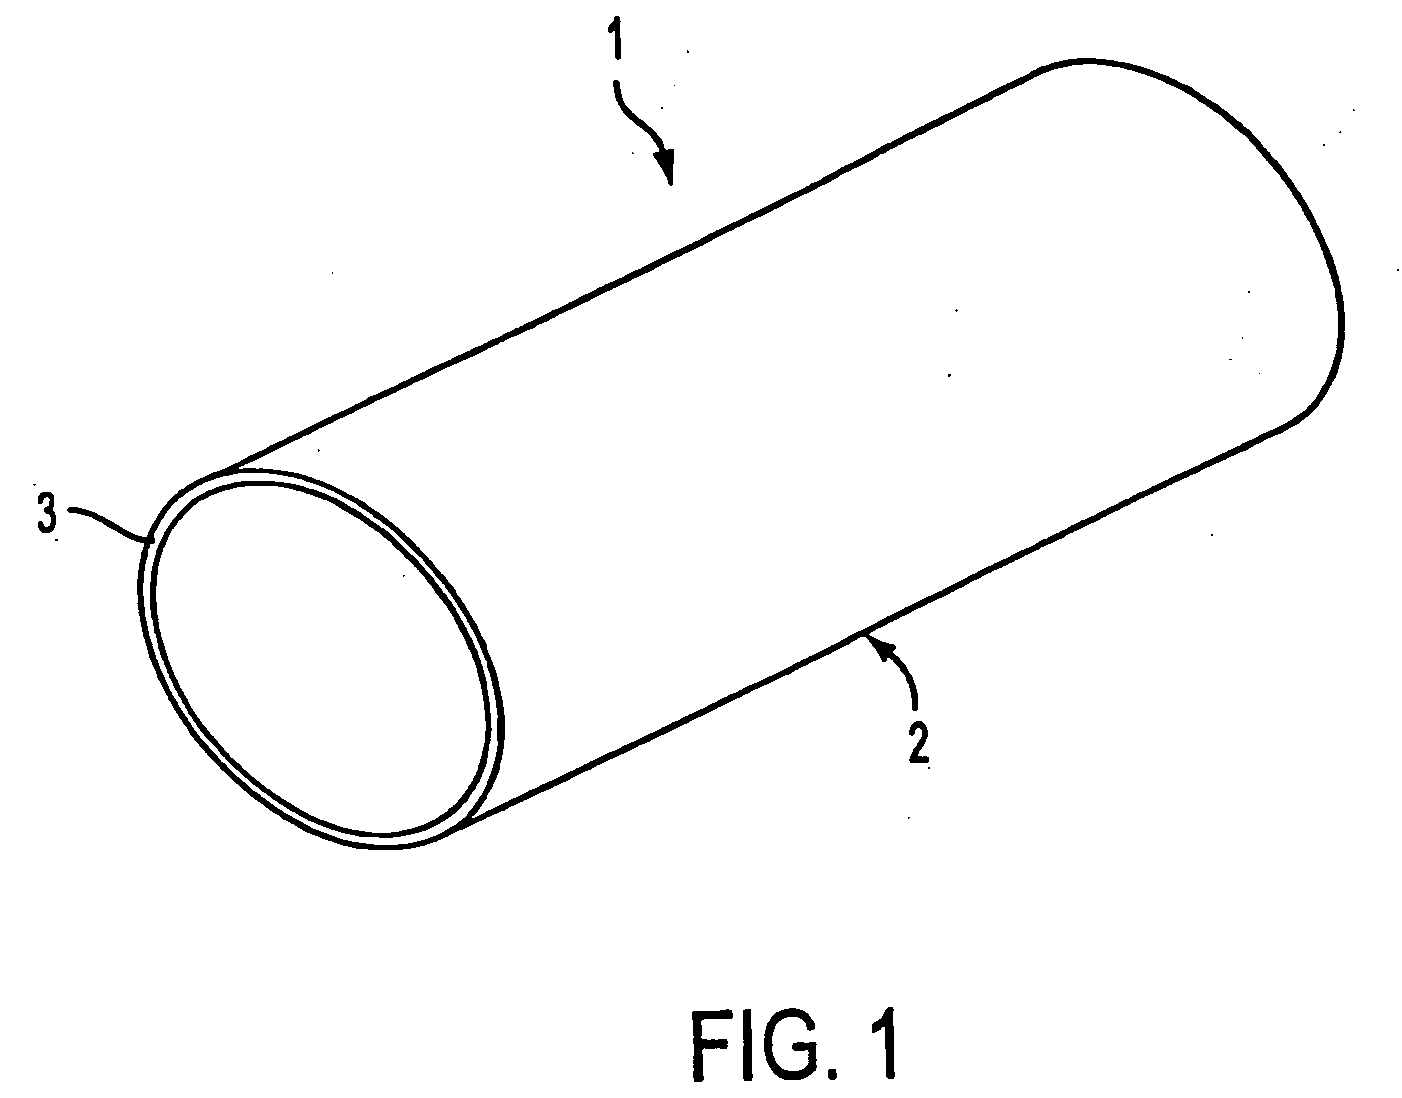 Methods and apparatus for stent having an expandable web structure